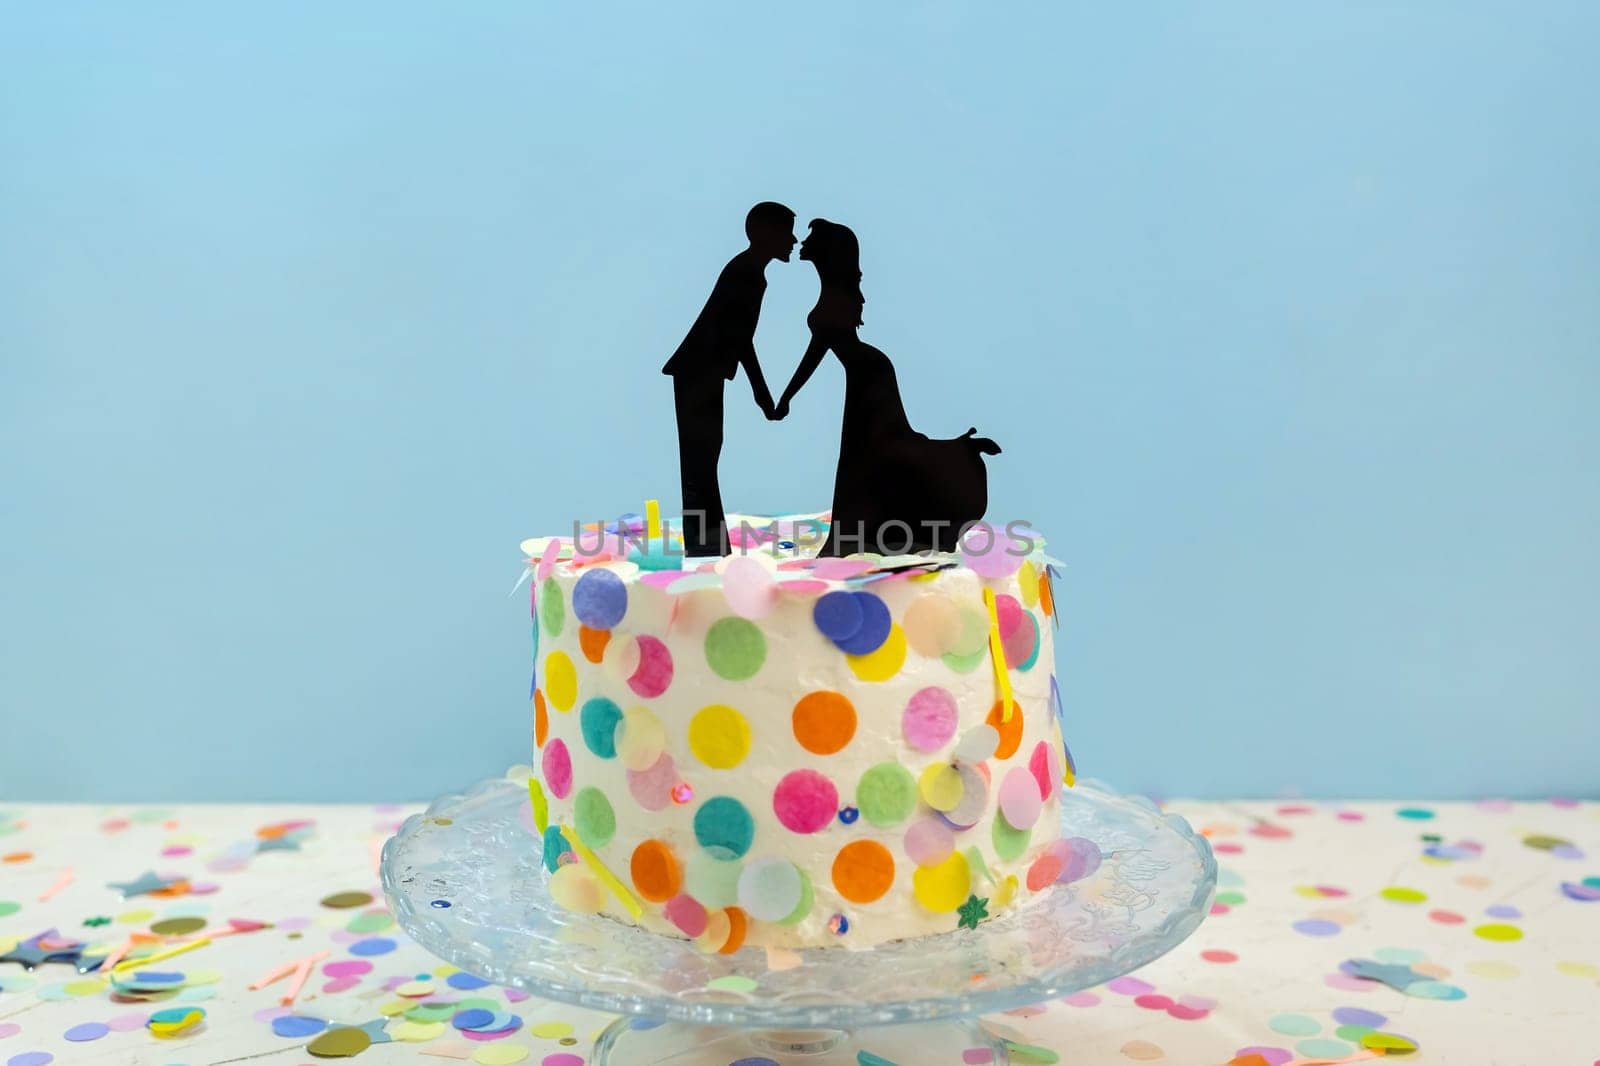 Bride and groom kissing cake toppers on decorated wedding cake. Newlywed figurines decoration on sweet wedding cake